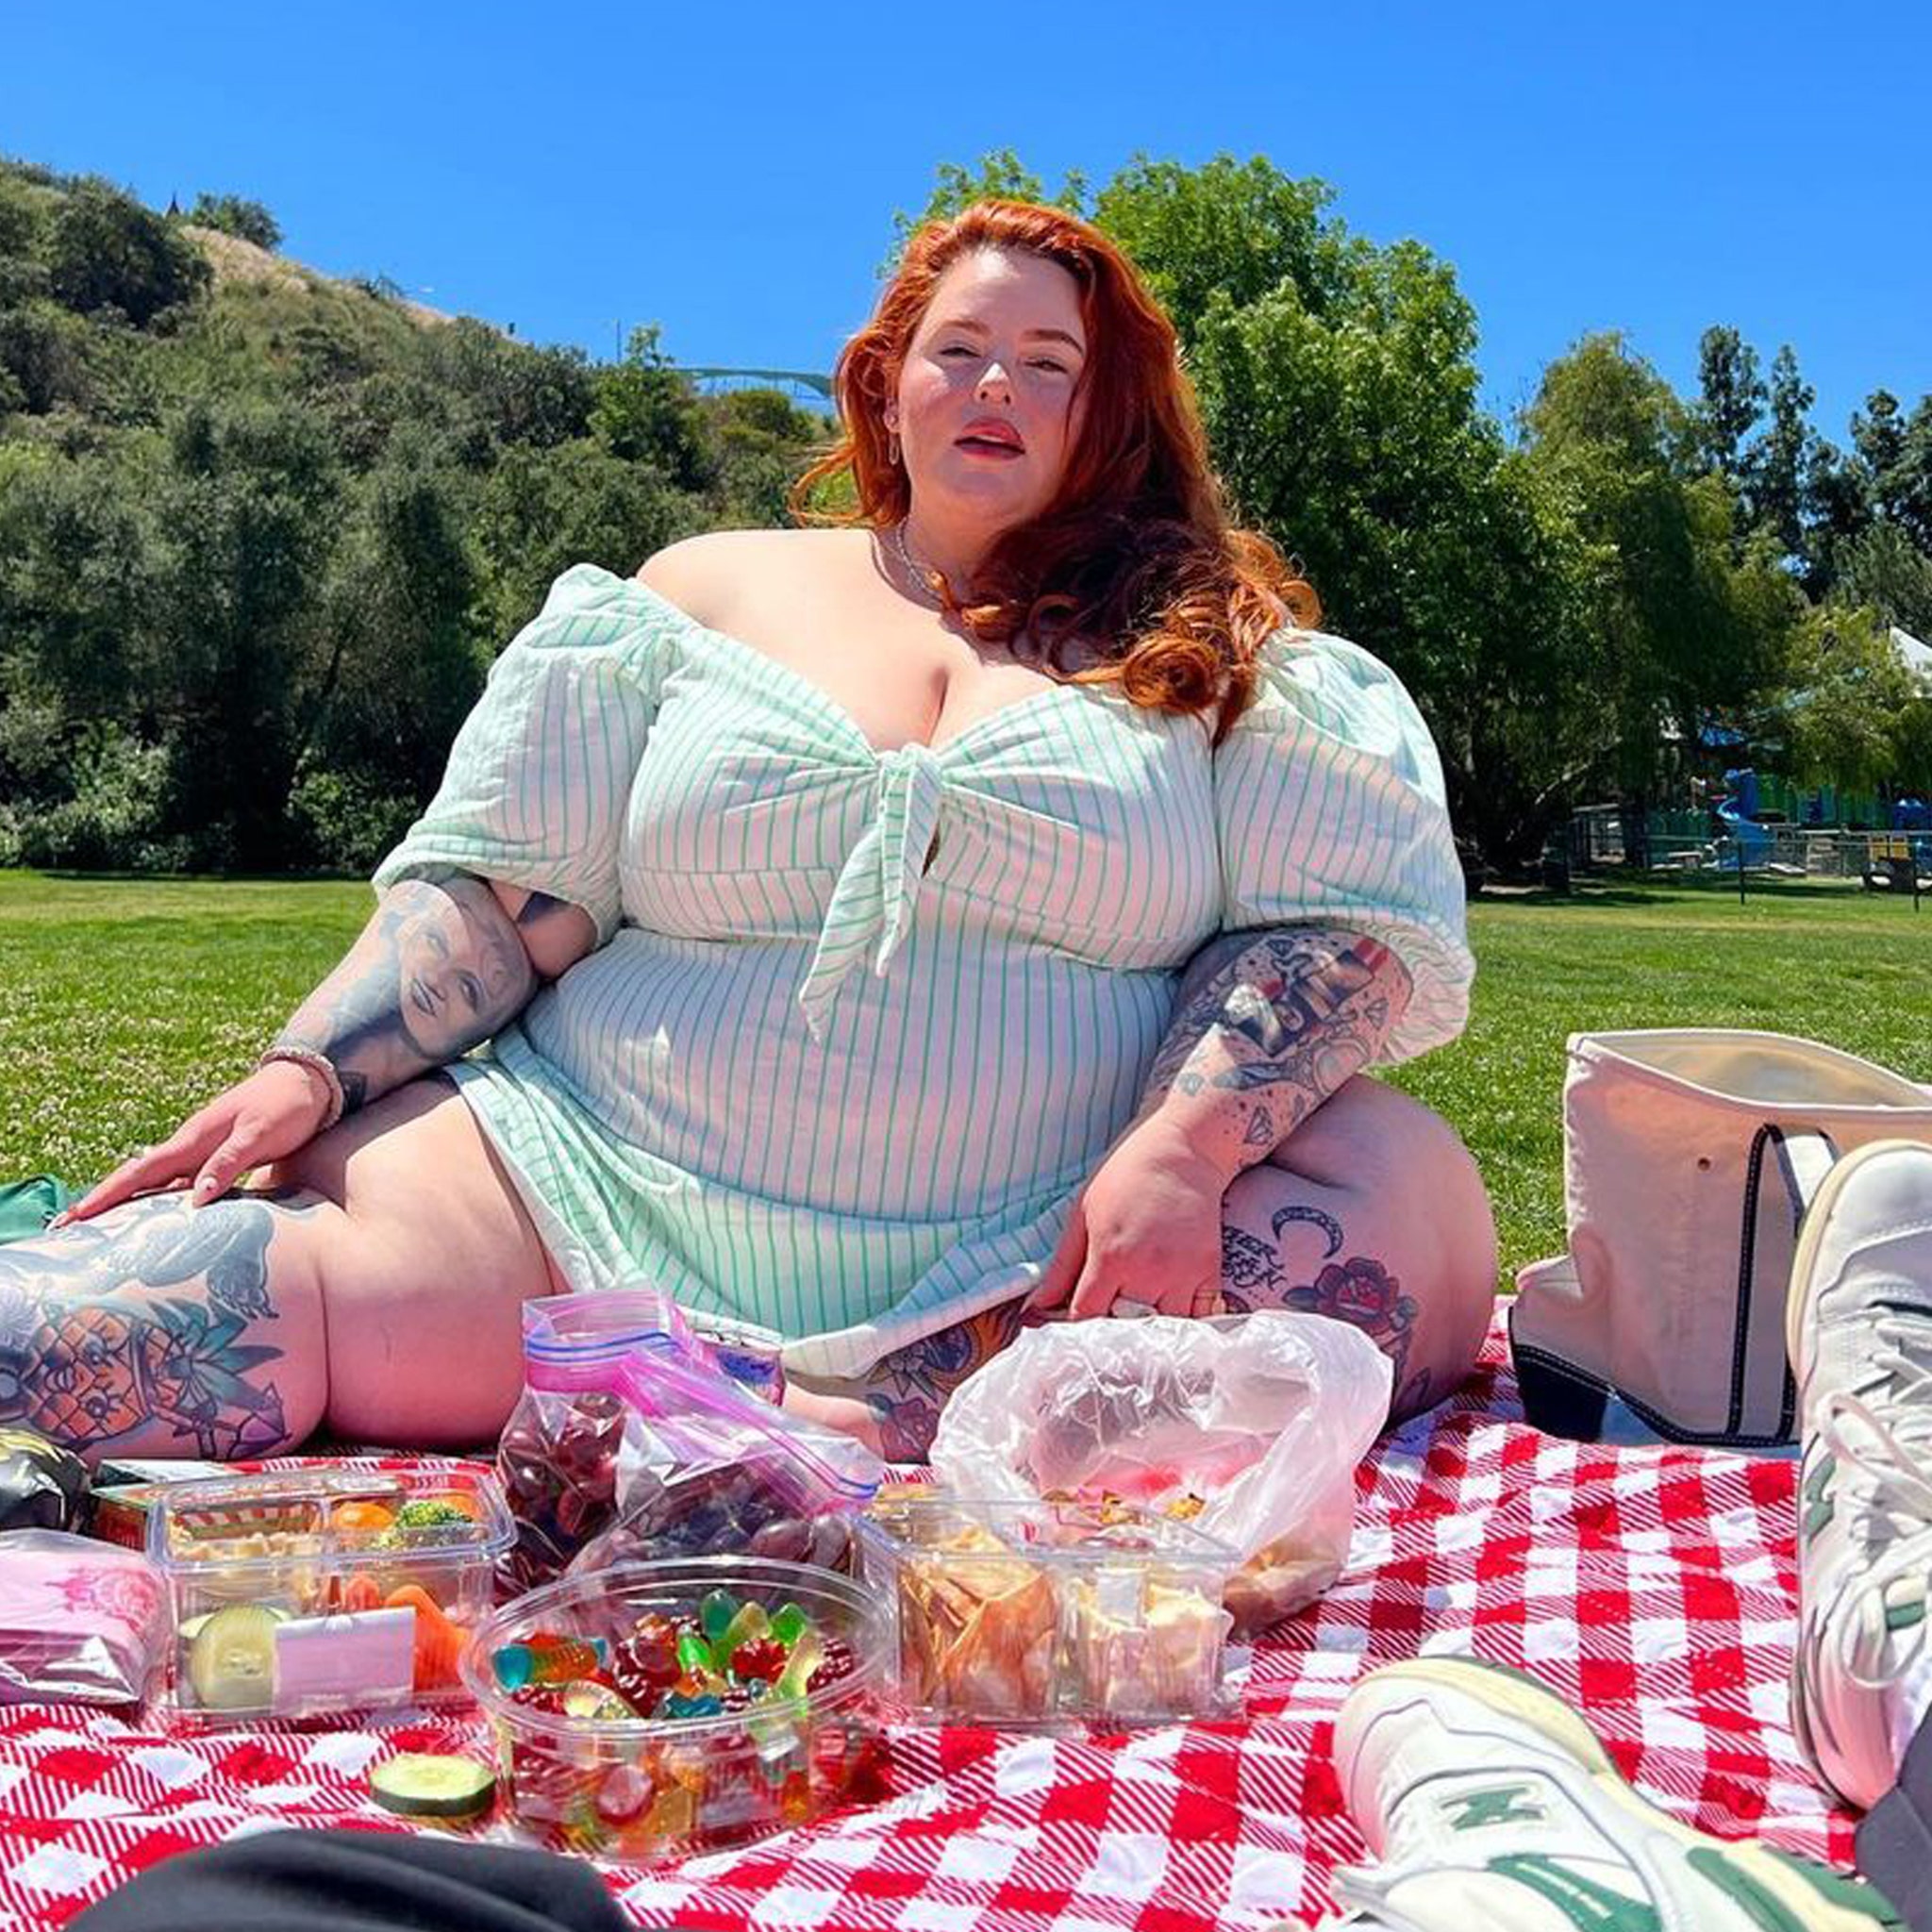 Who Is Tess Holliday?